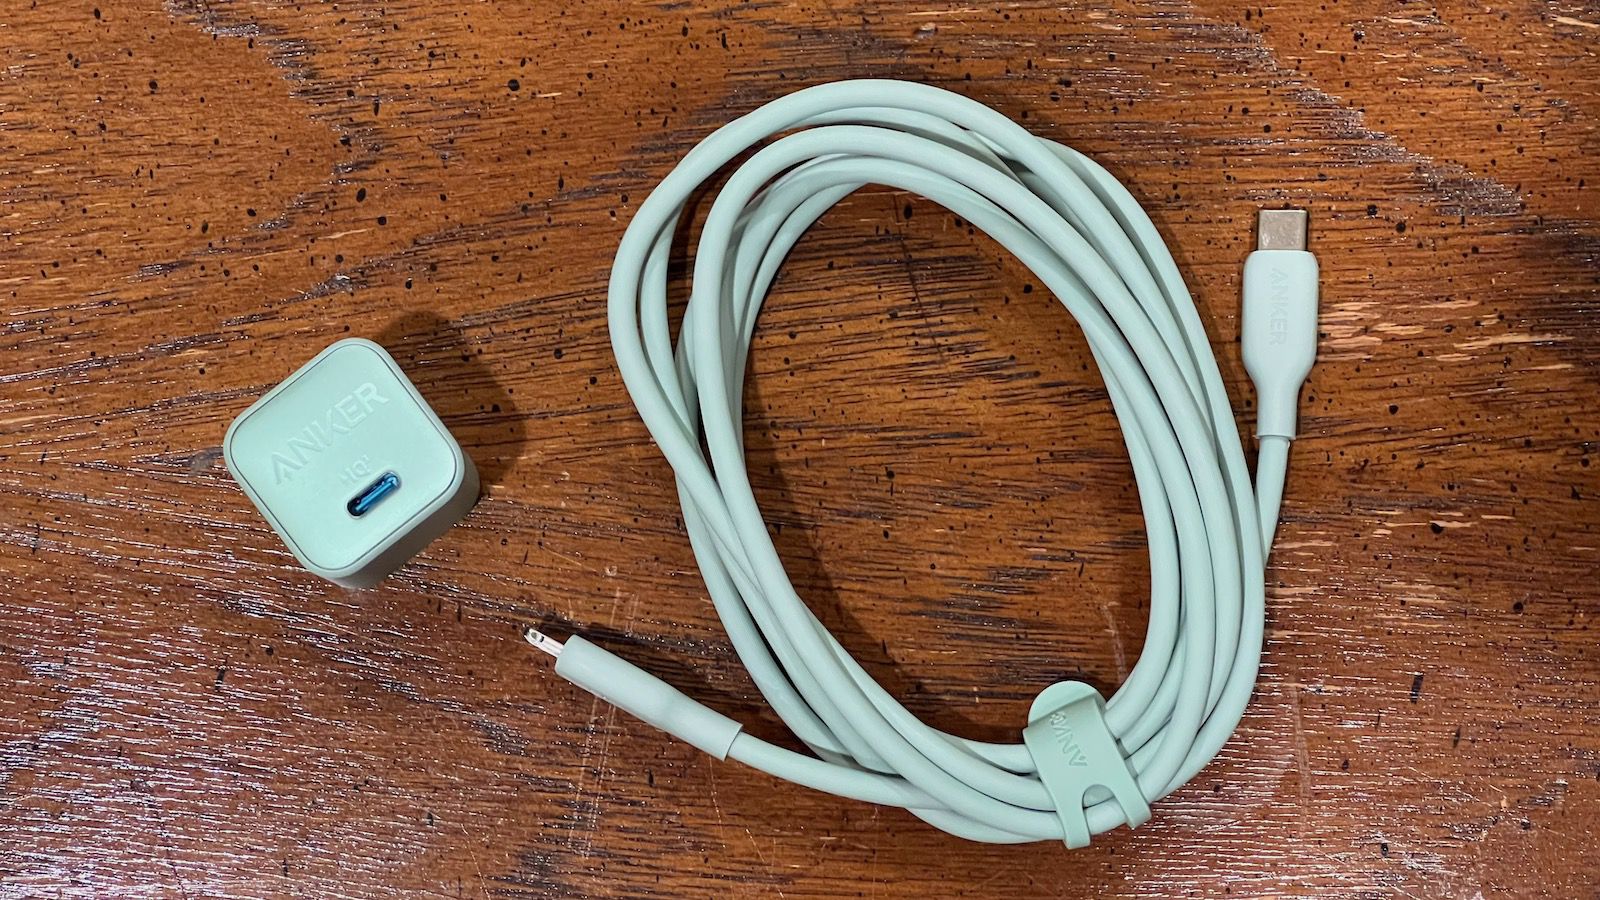 Anker 511 Nano Pro Review - Switch Chargers